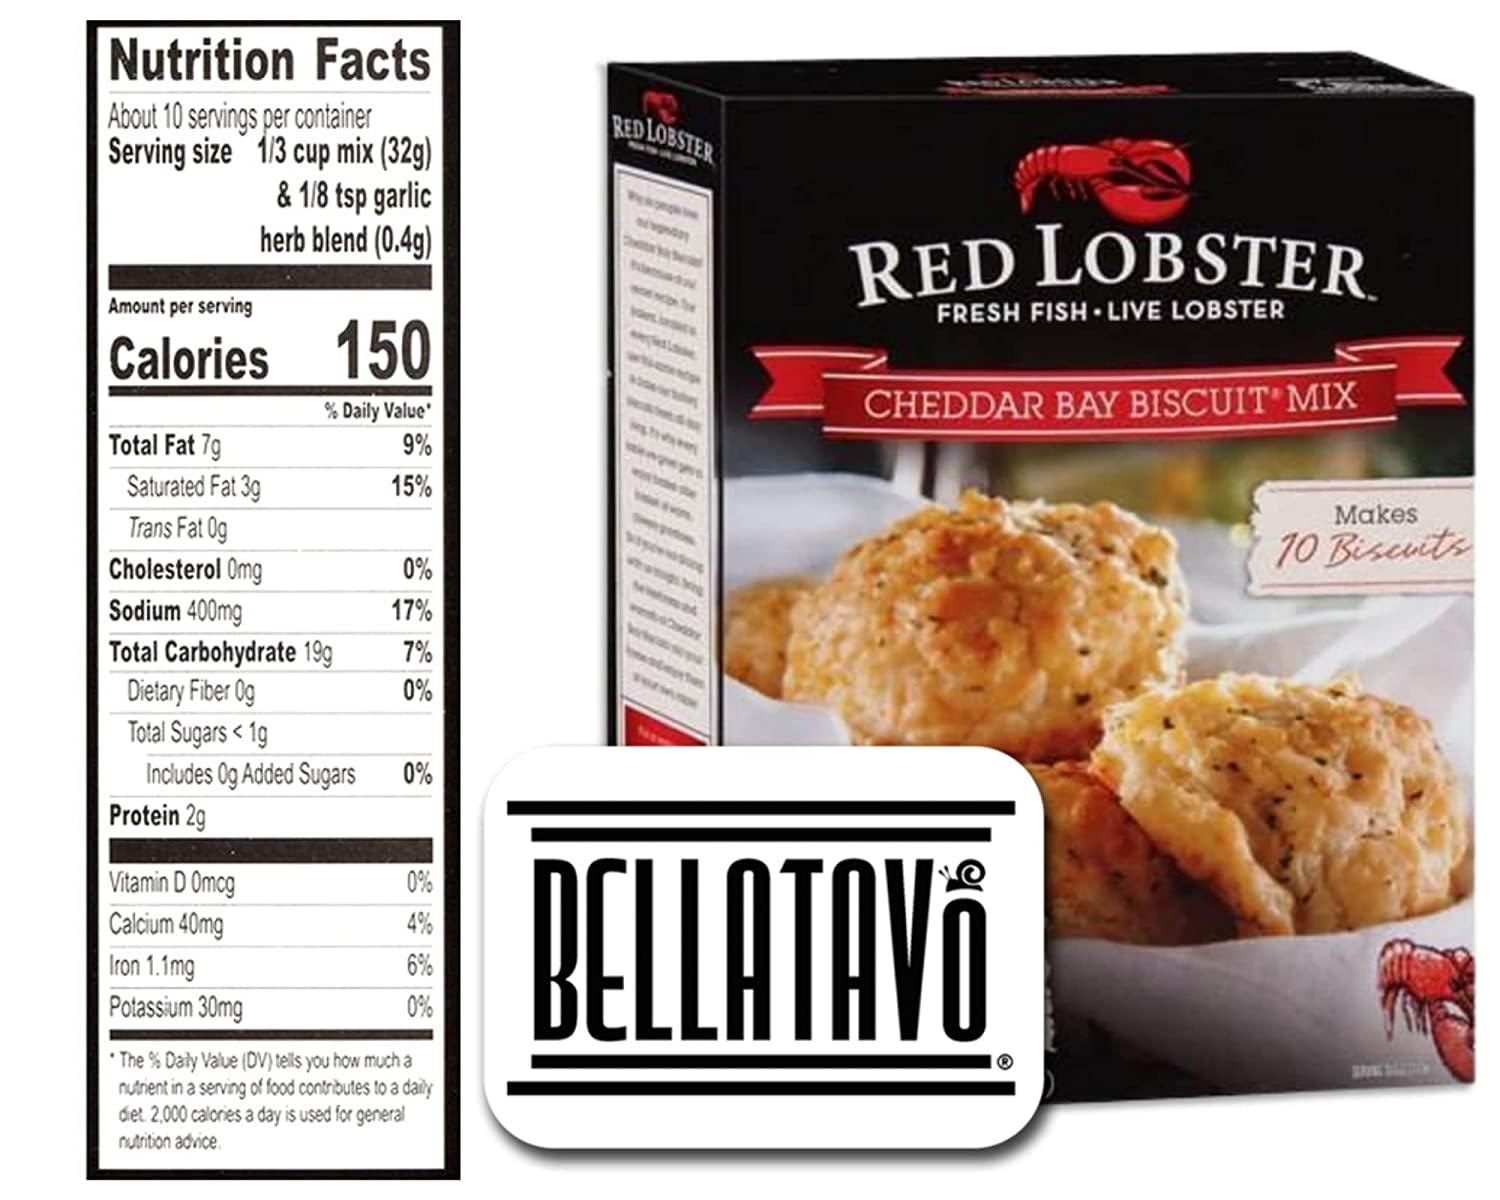 Red Lobster, Cheddar Bay Biscuit Mix, 11.36oz Box (Pack of 3)